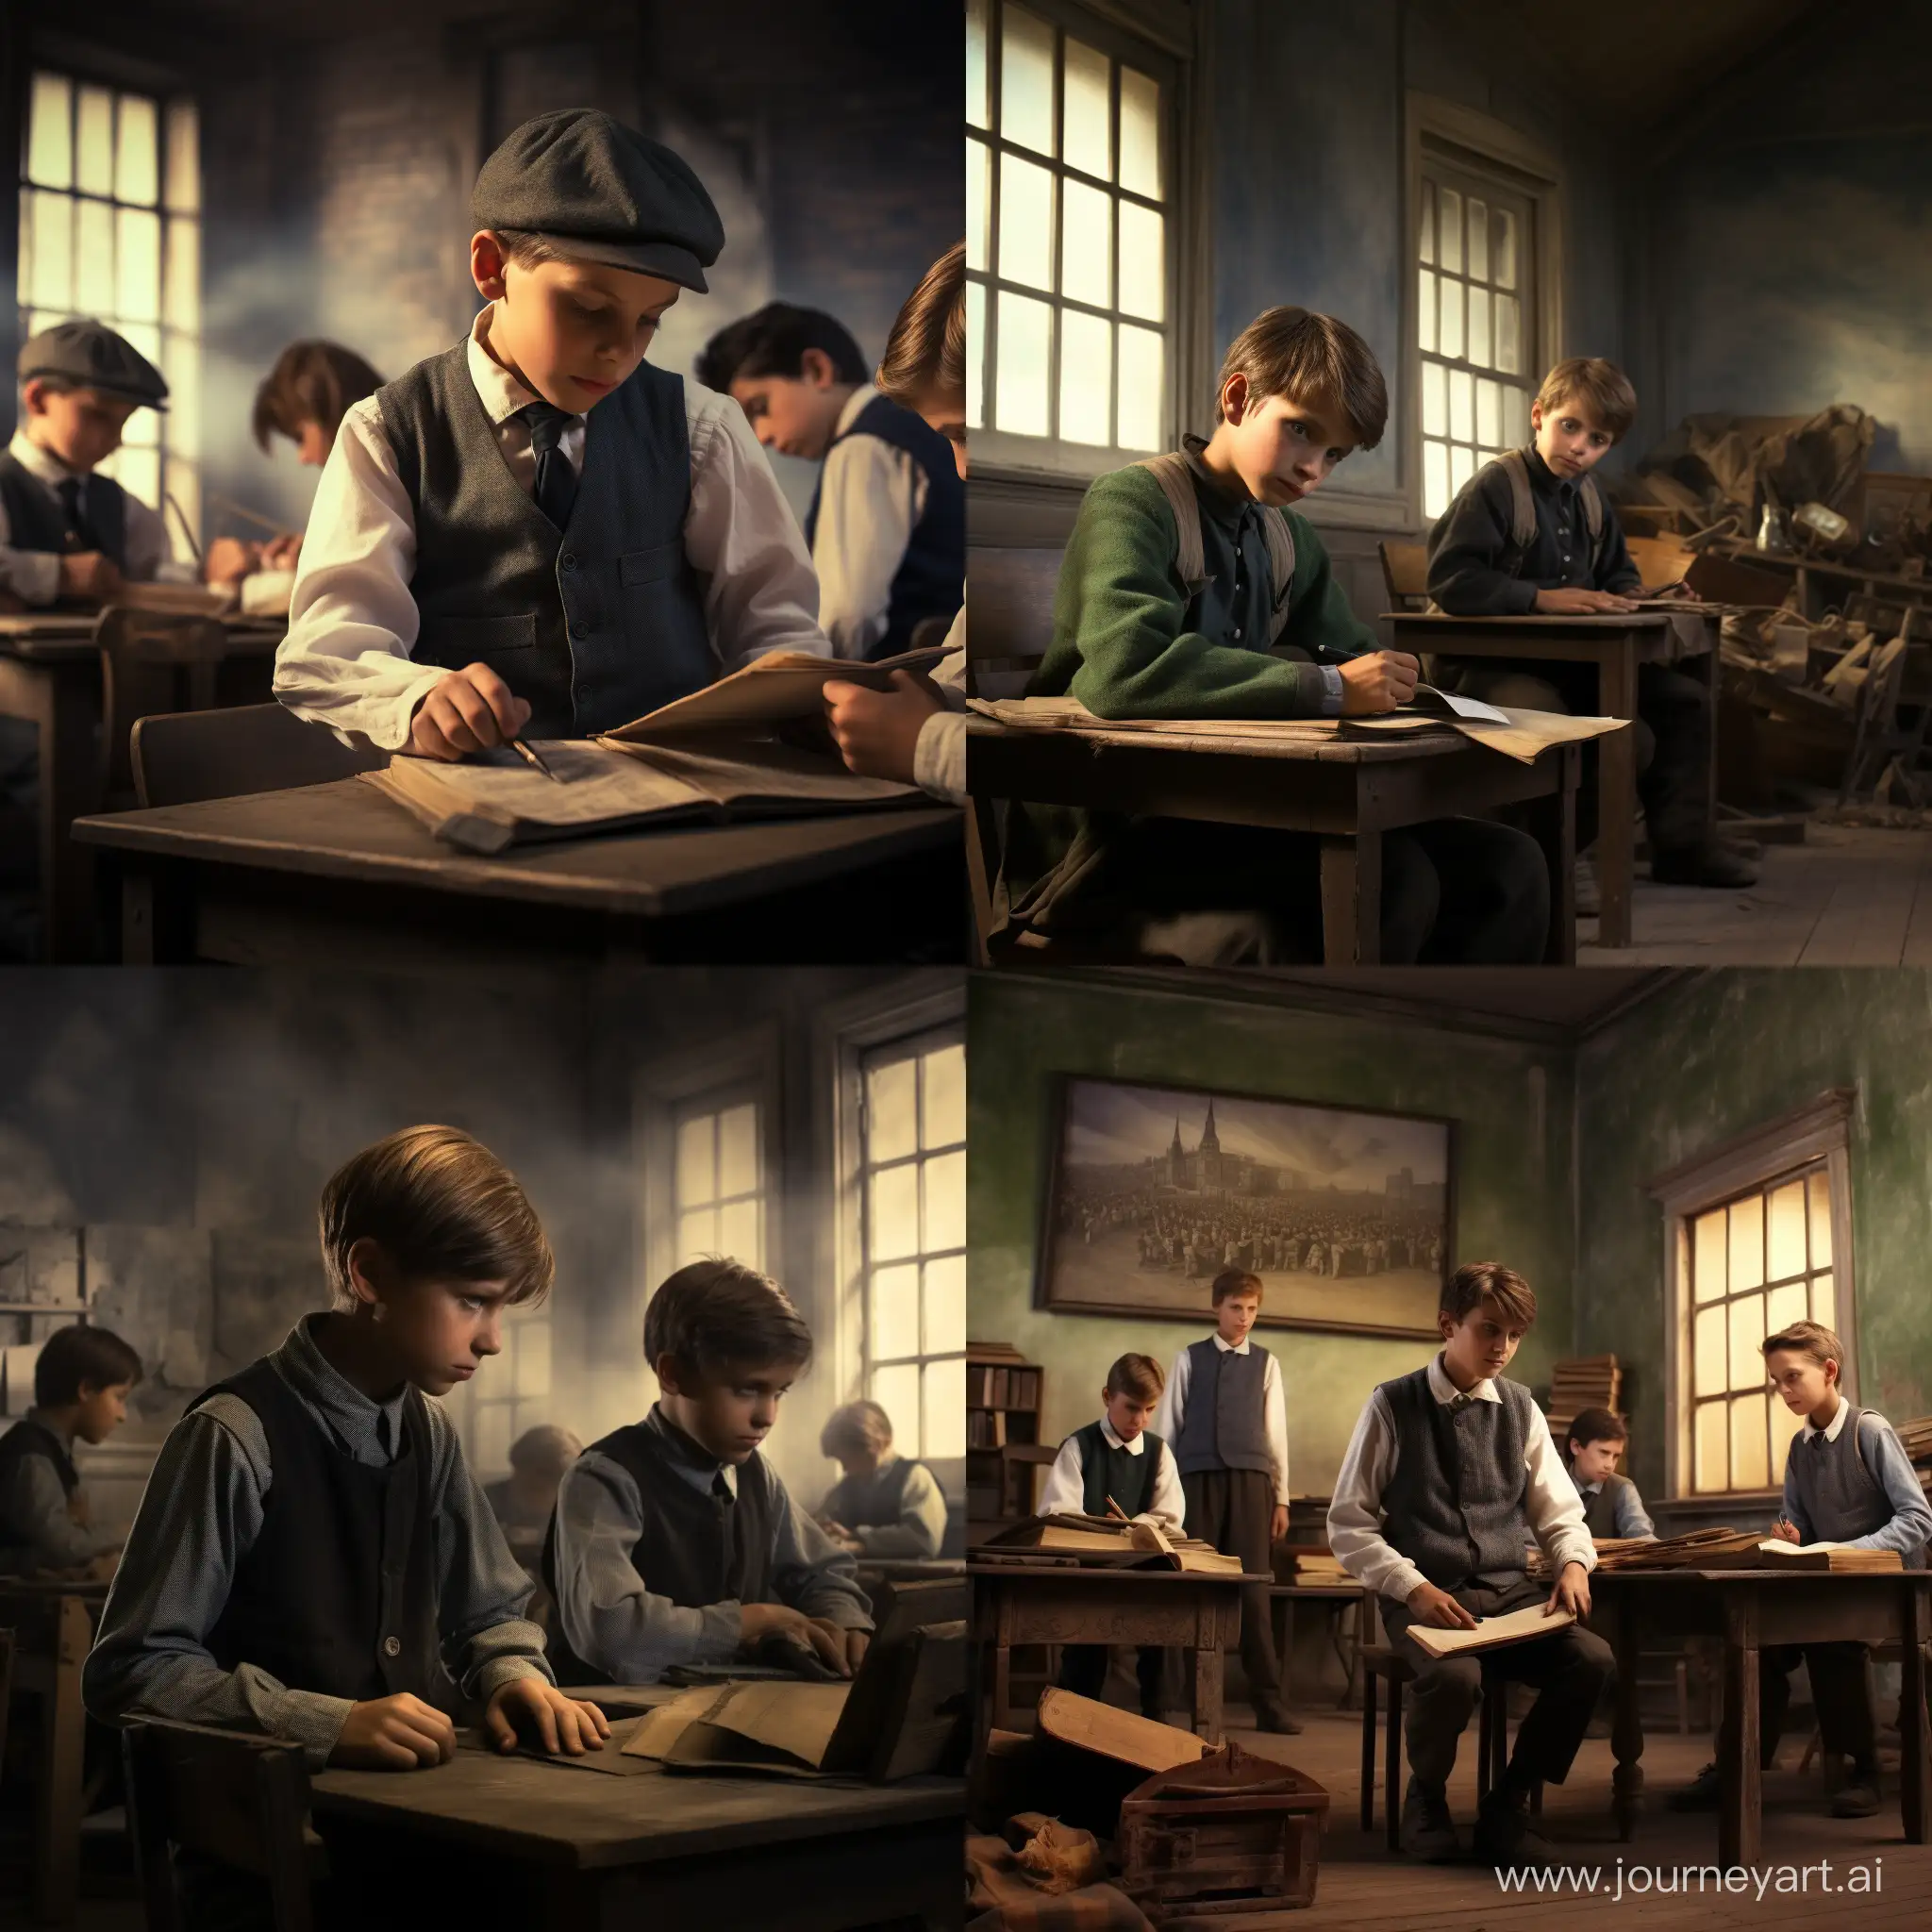 Vintage-Classroom-Scene-with-Impoverished-Boys-in-19th-Century-Ambiance